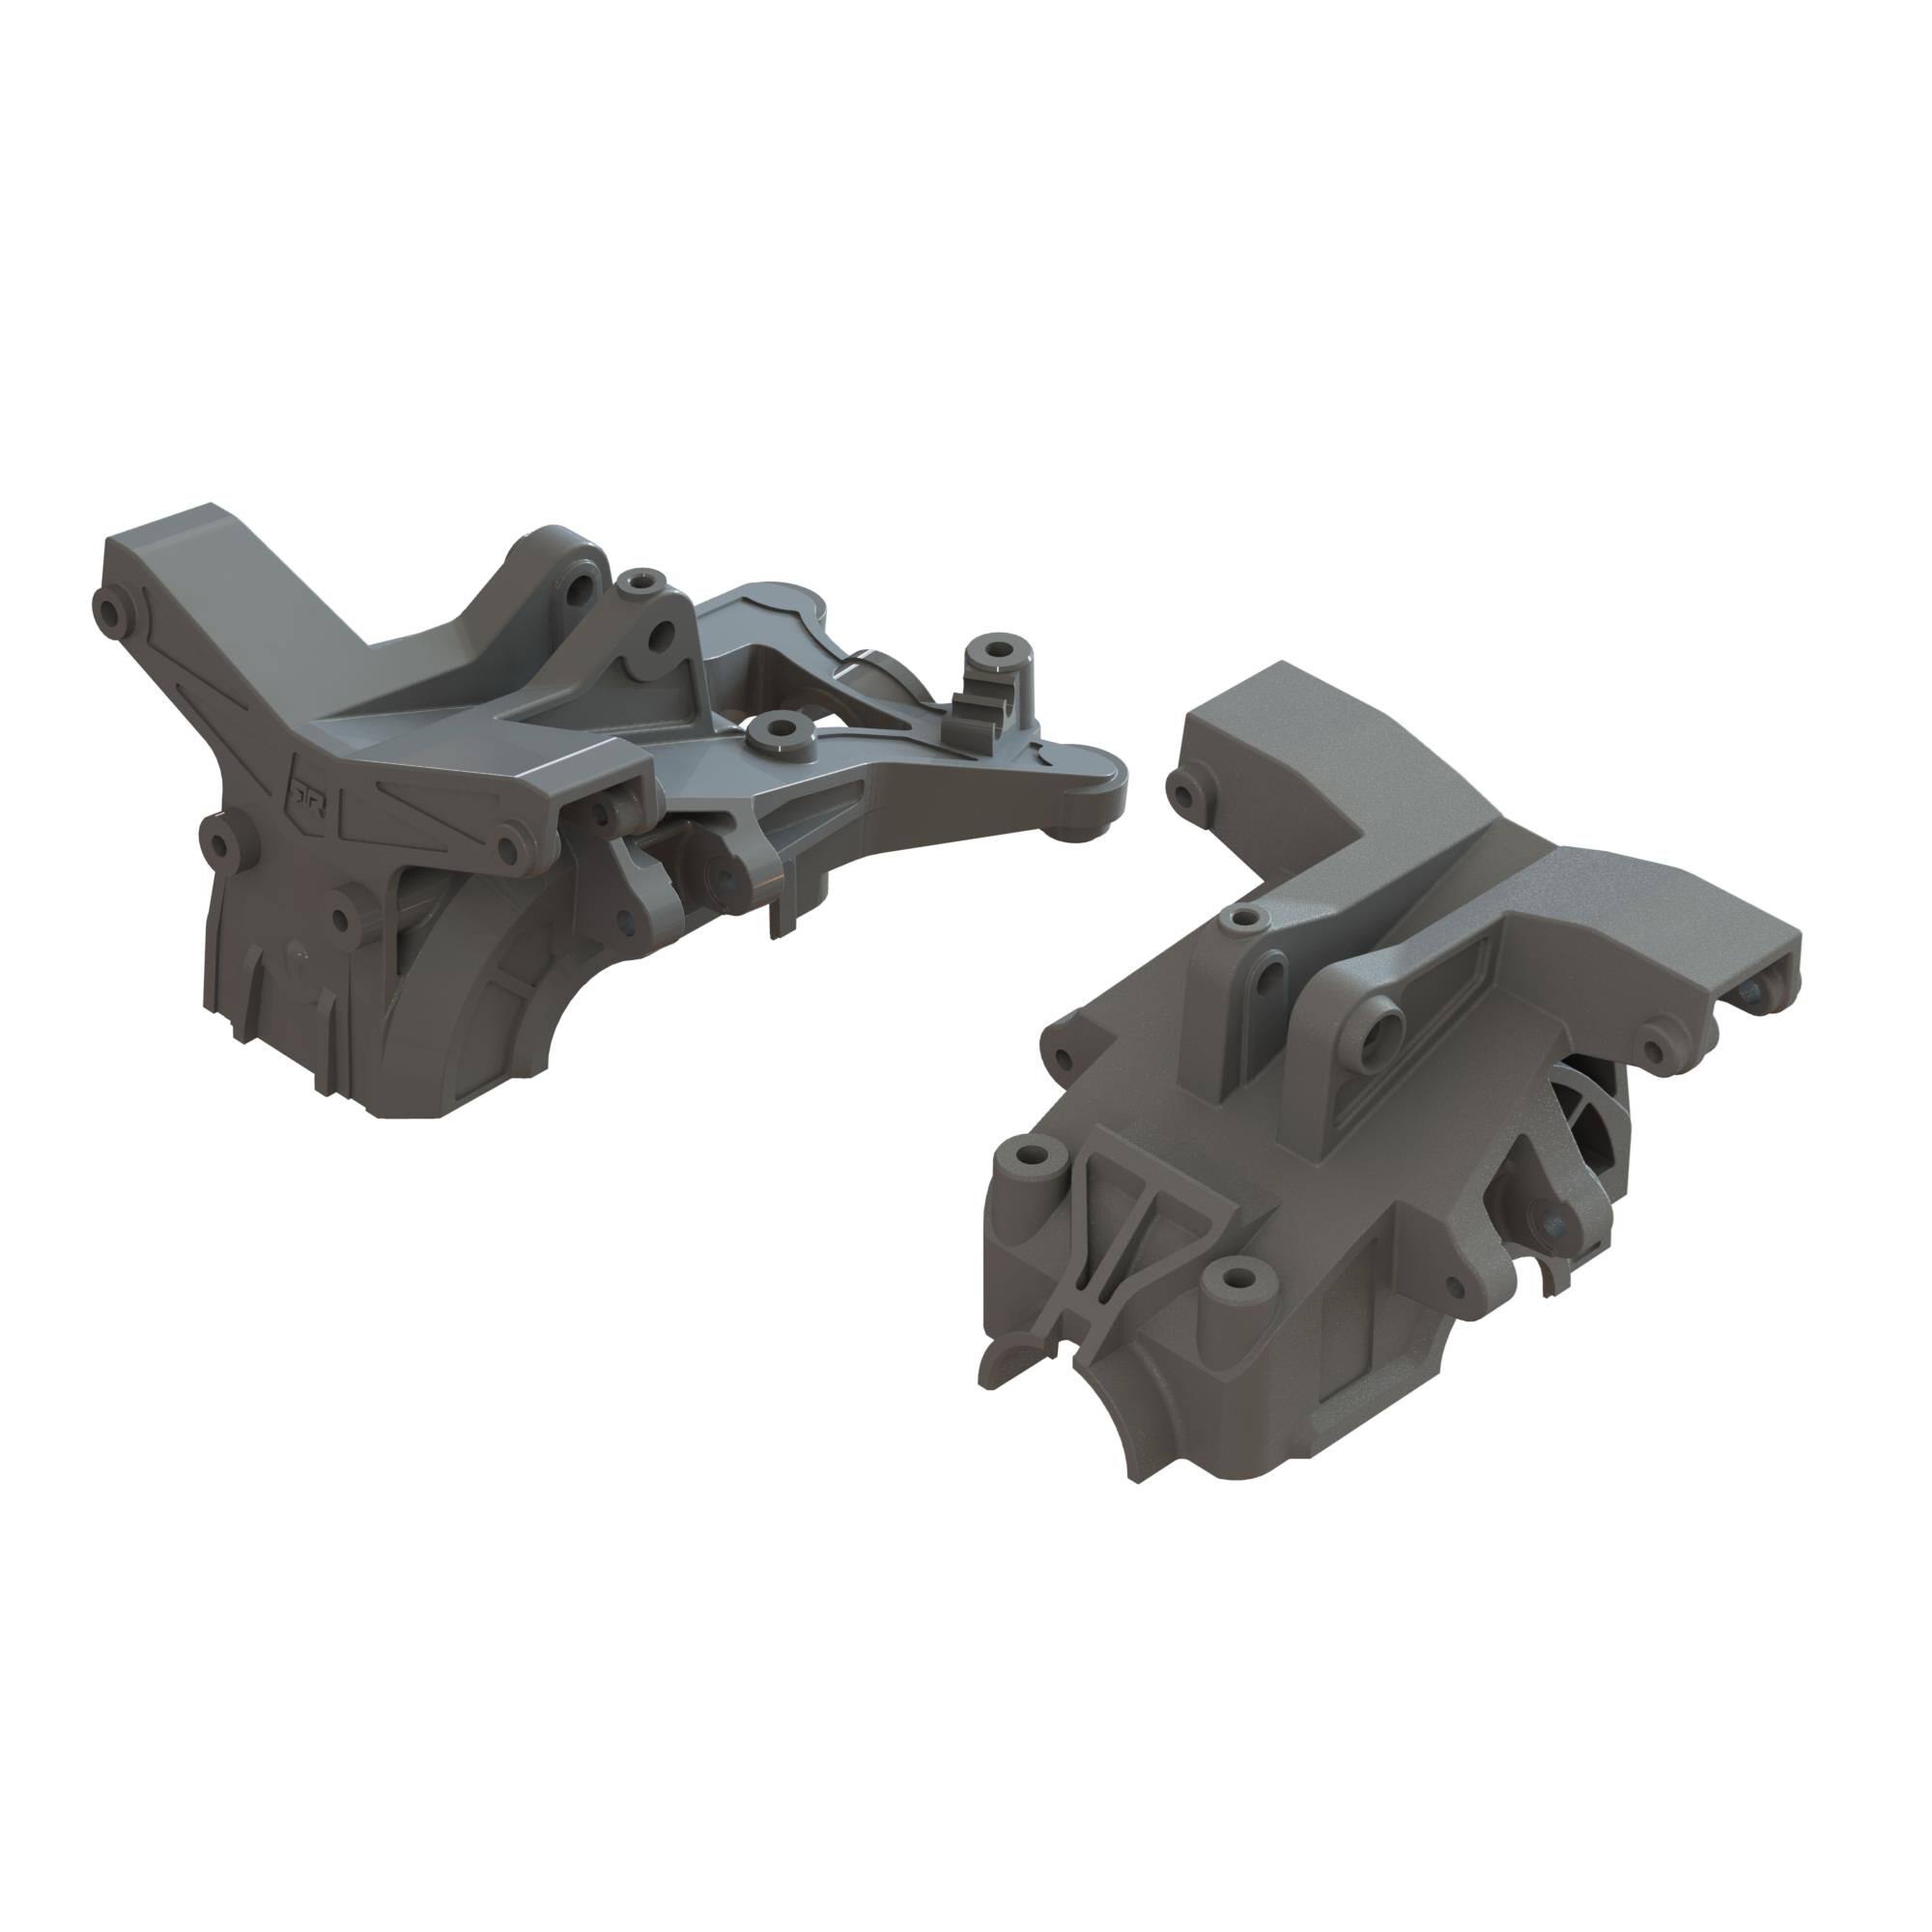 ARA320584 Composite Upper Gearbox Covers and Shock Tower